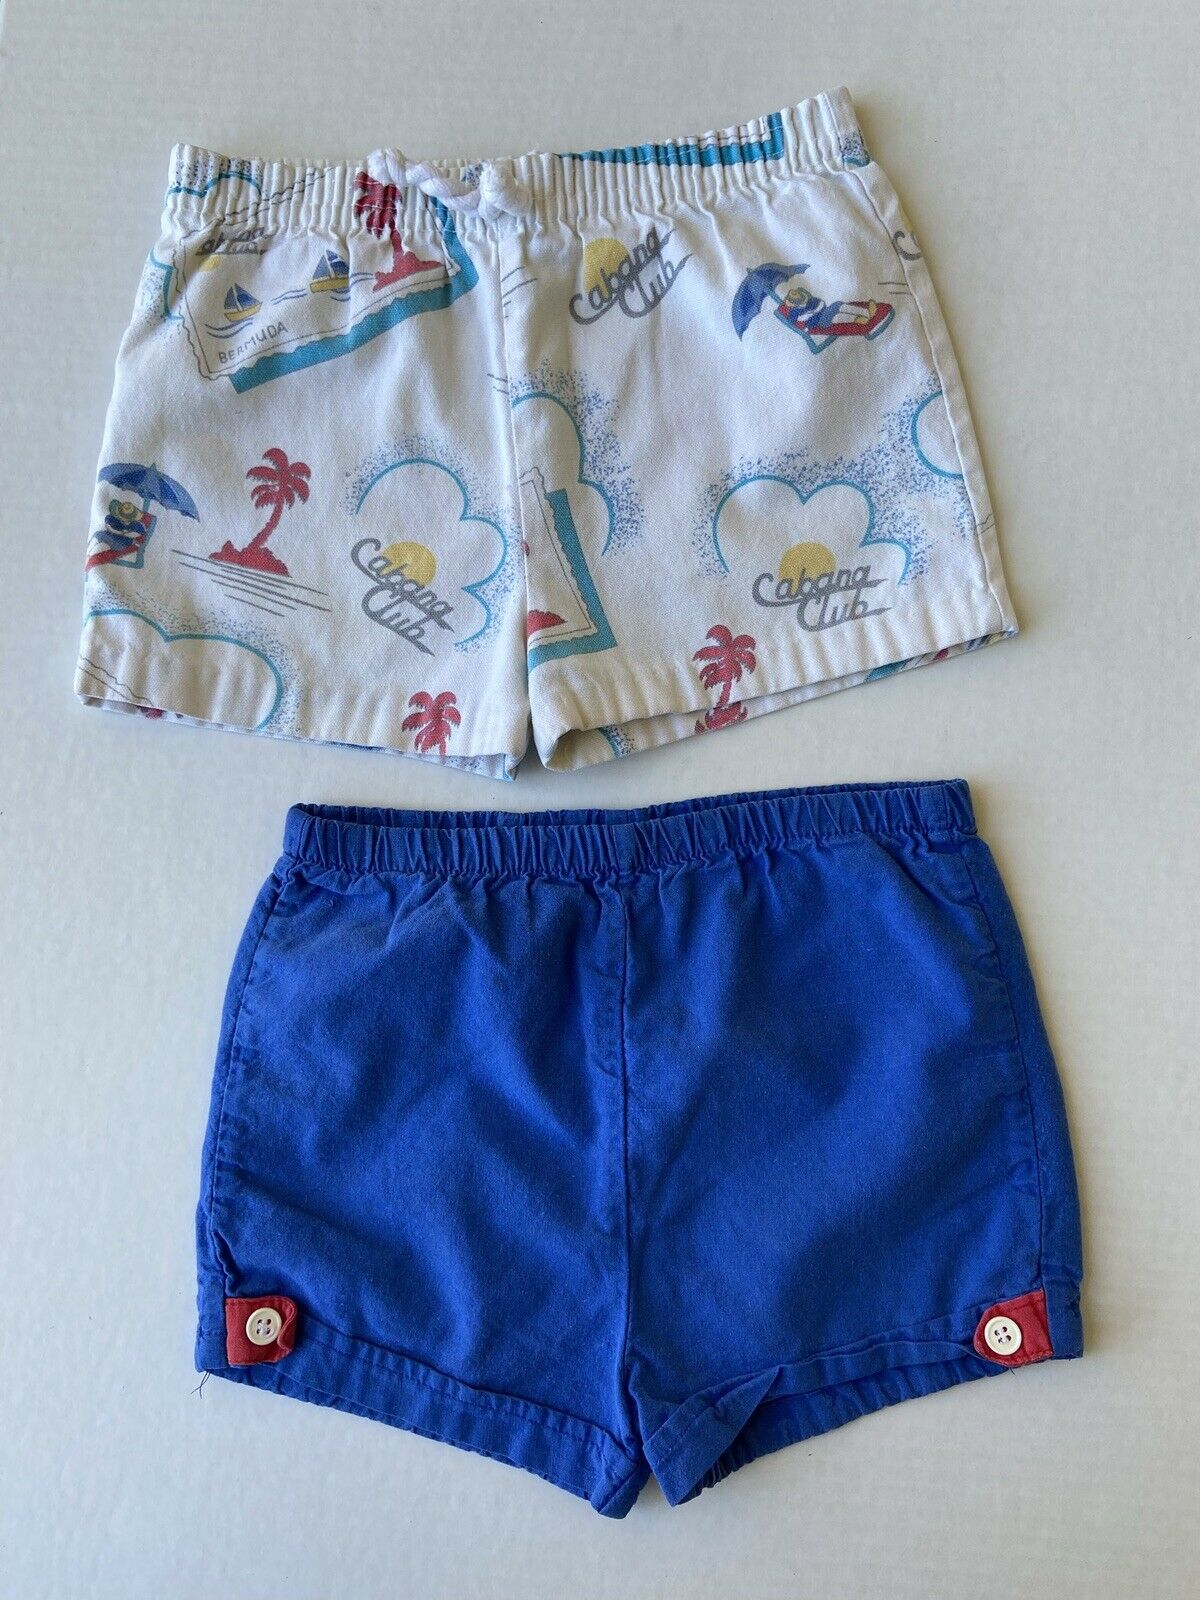 Vintage 80’s Toddler Boys Lot Of Two Shorts Size Range 24m-3t Beach